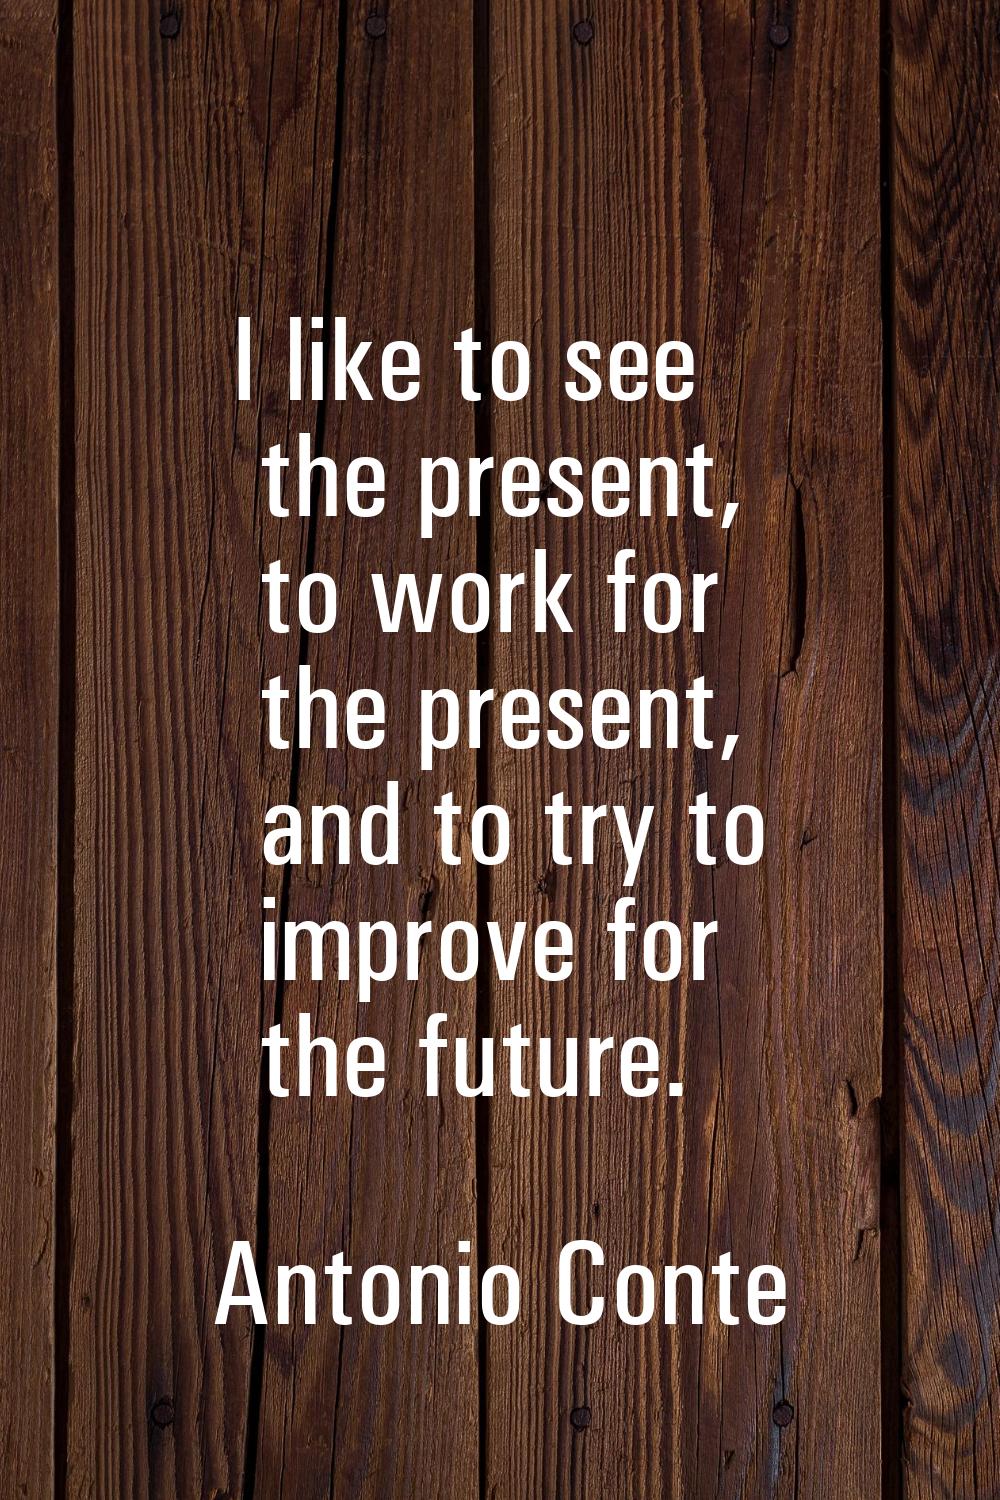 I like to see the present, to work for the present, and to try to improve for the future.